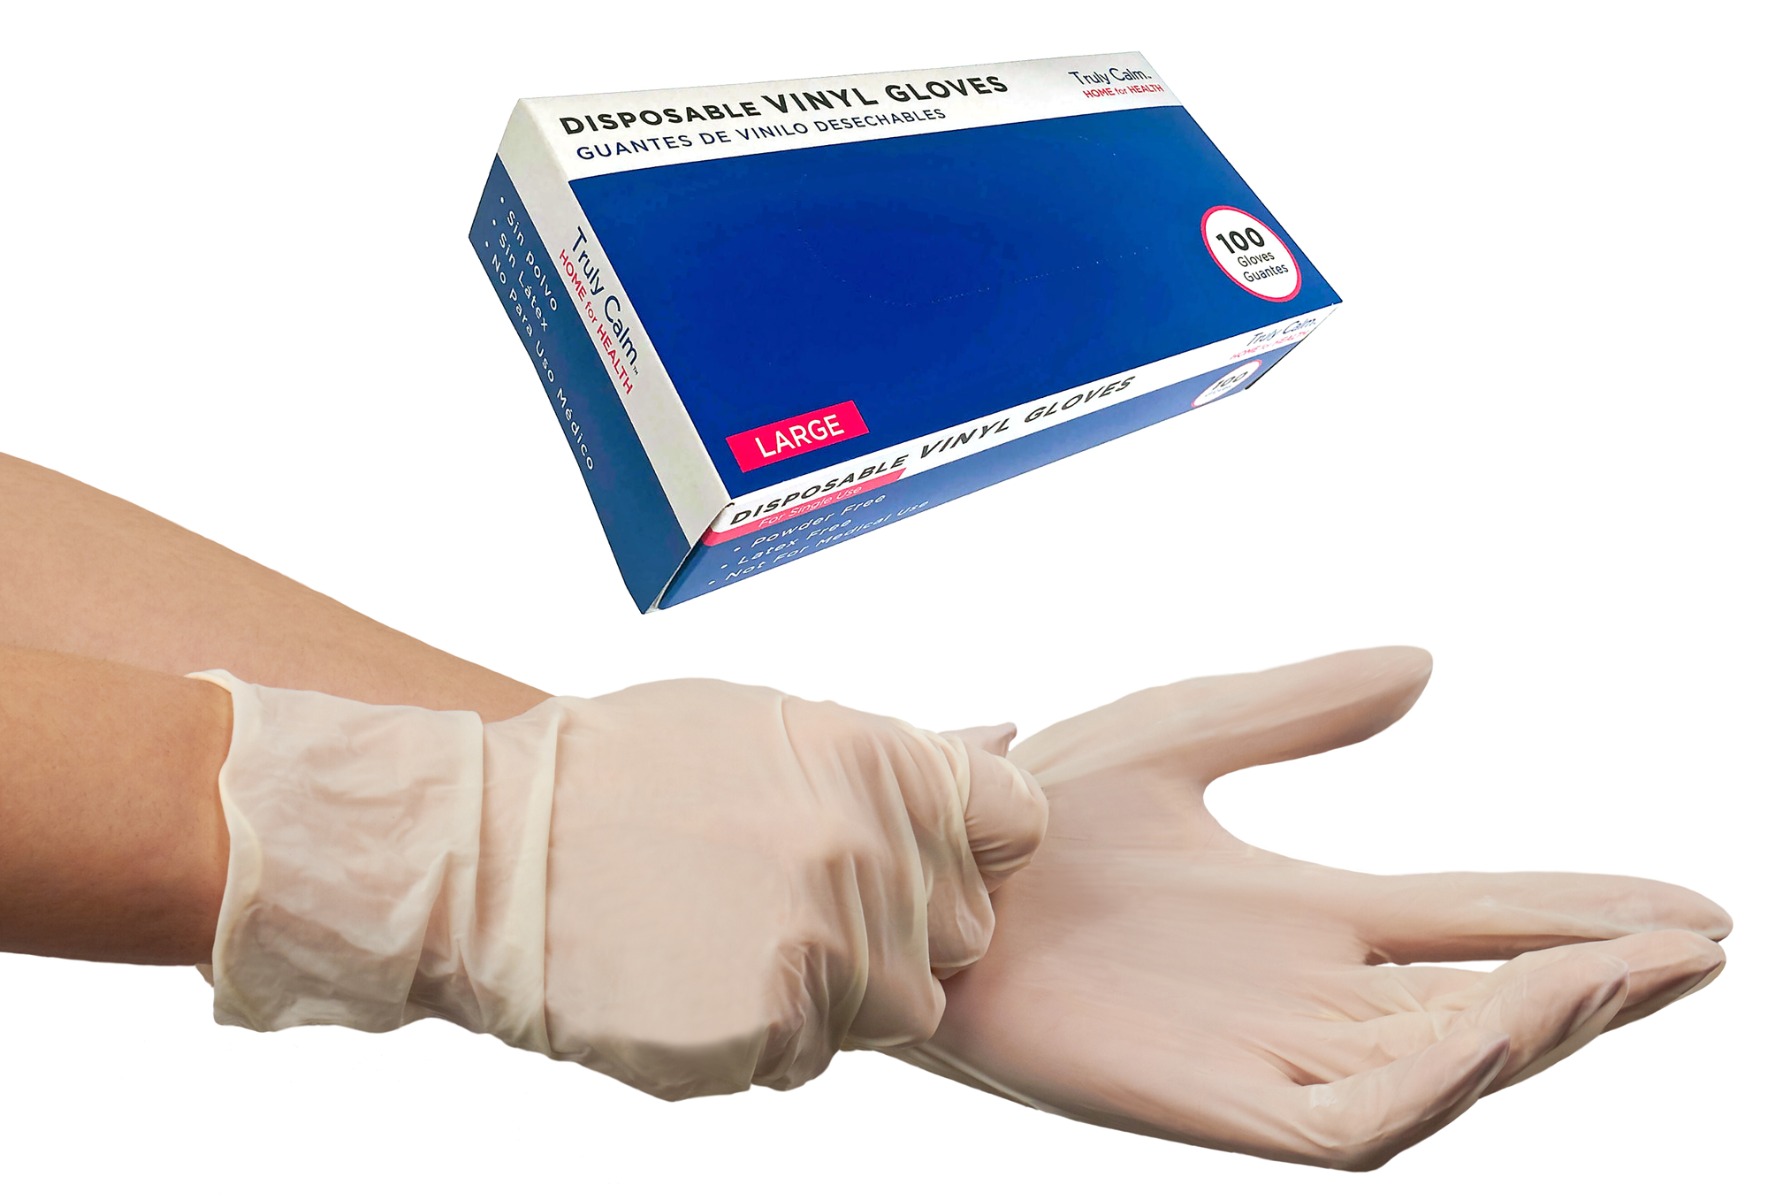 Truly Calm Disposable Vinyl GLOVES - 100-Packs